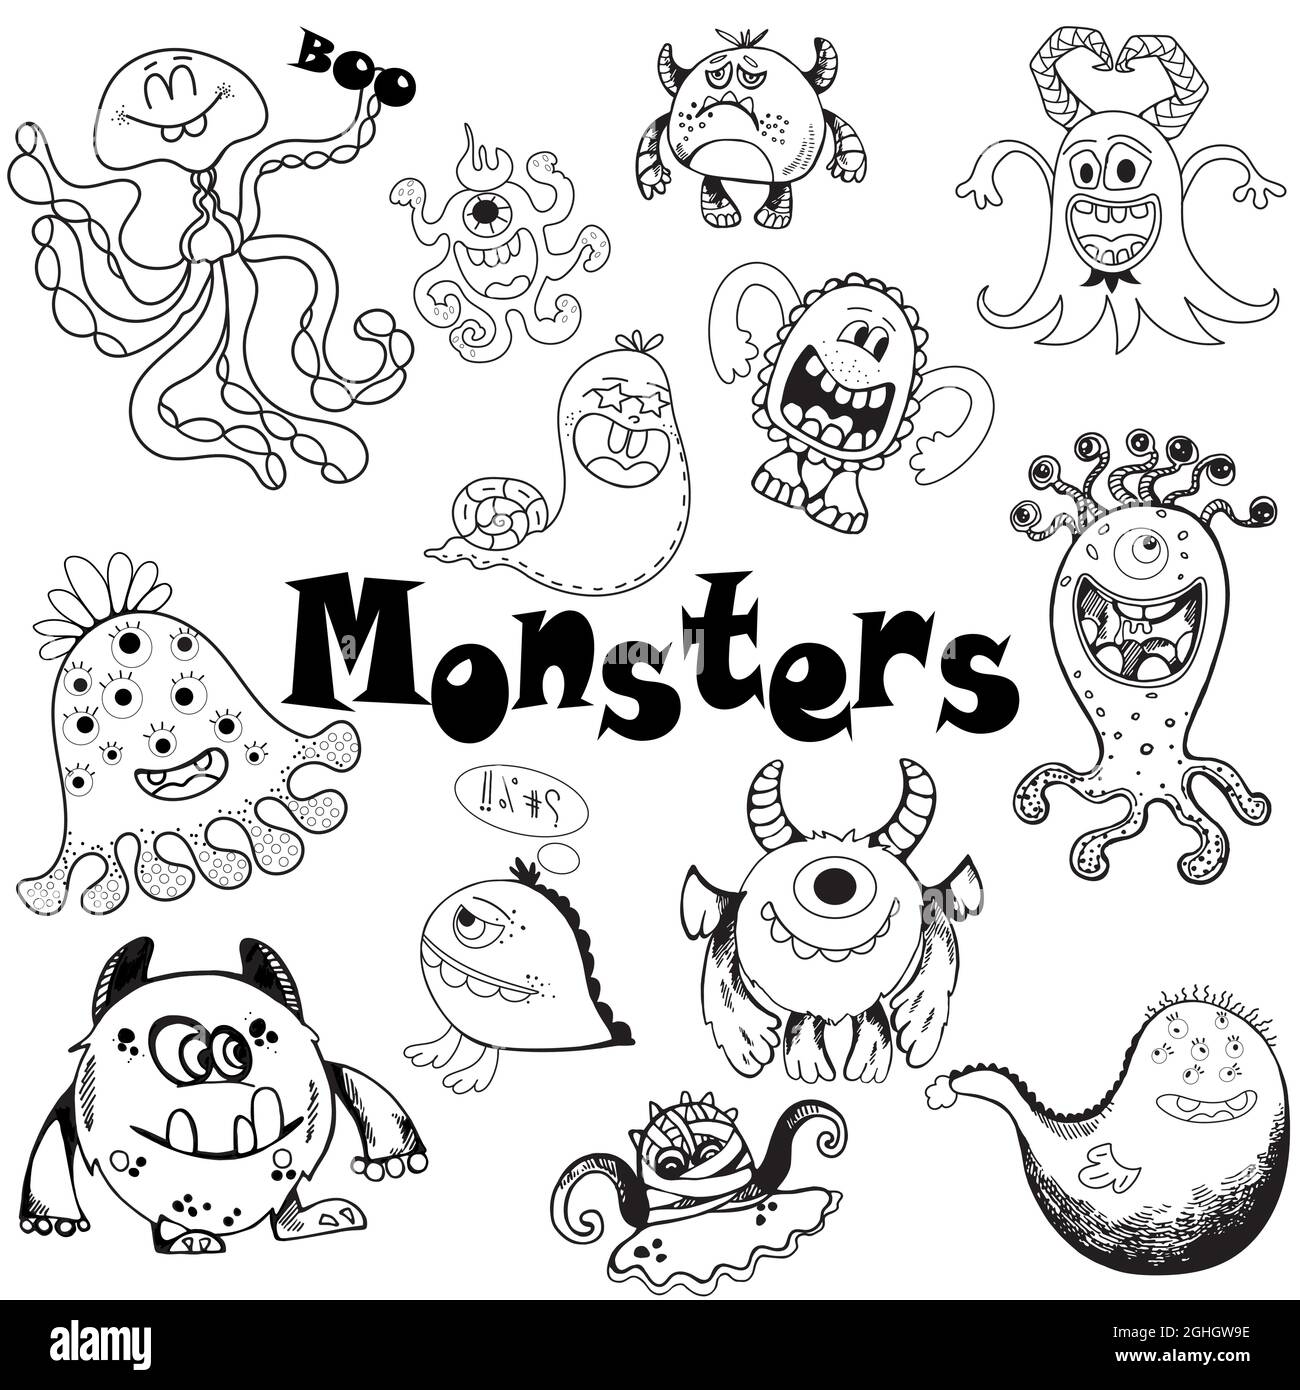 Set of hand drawn sketch style fictional little monsters isolated on white background. Vector illustration. Stock Vector